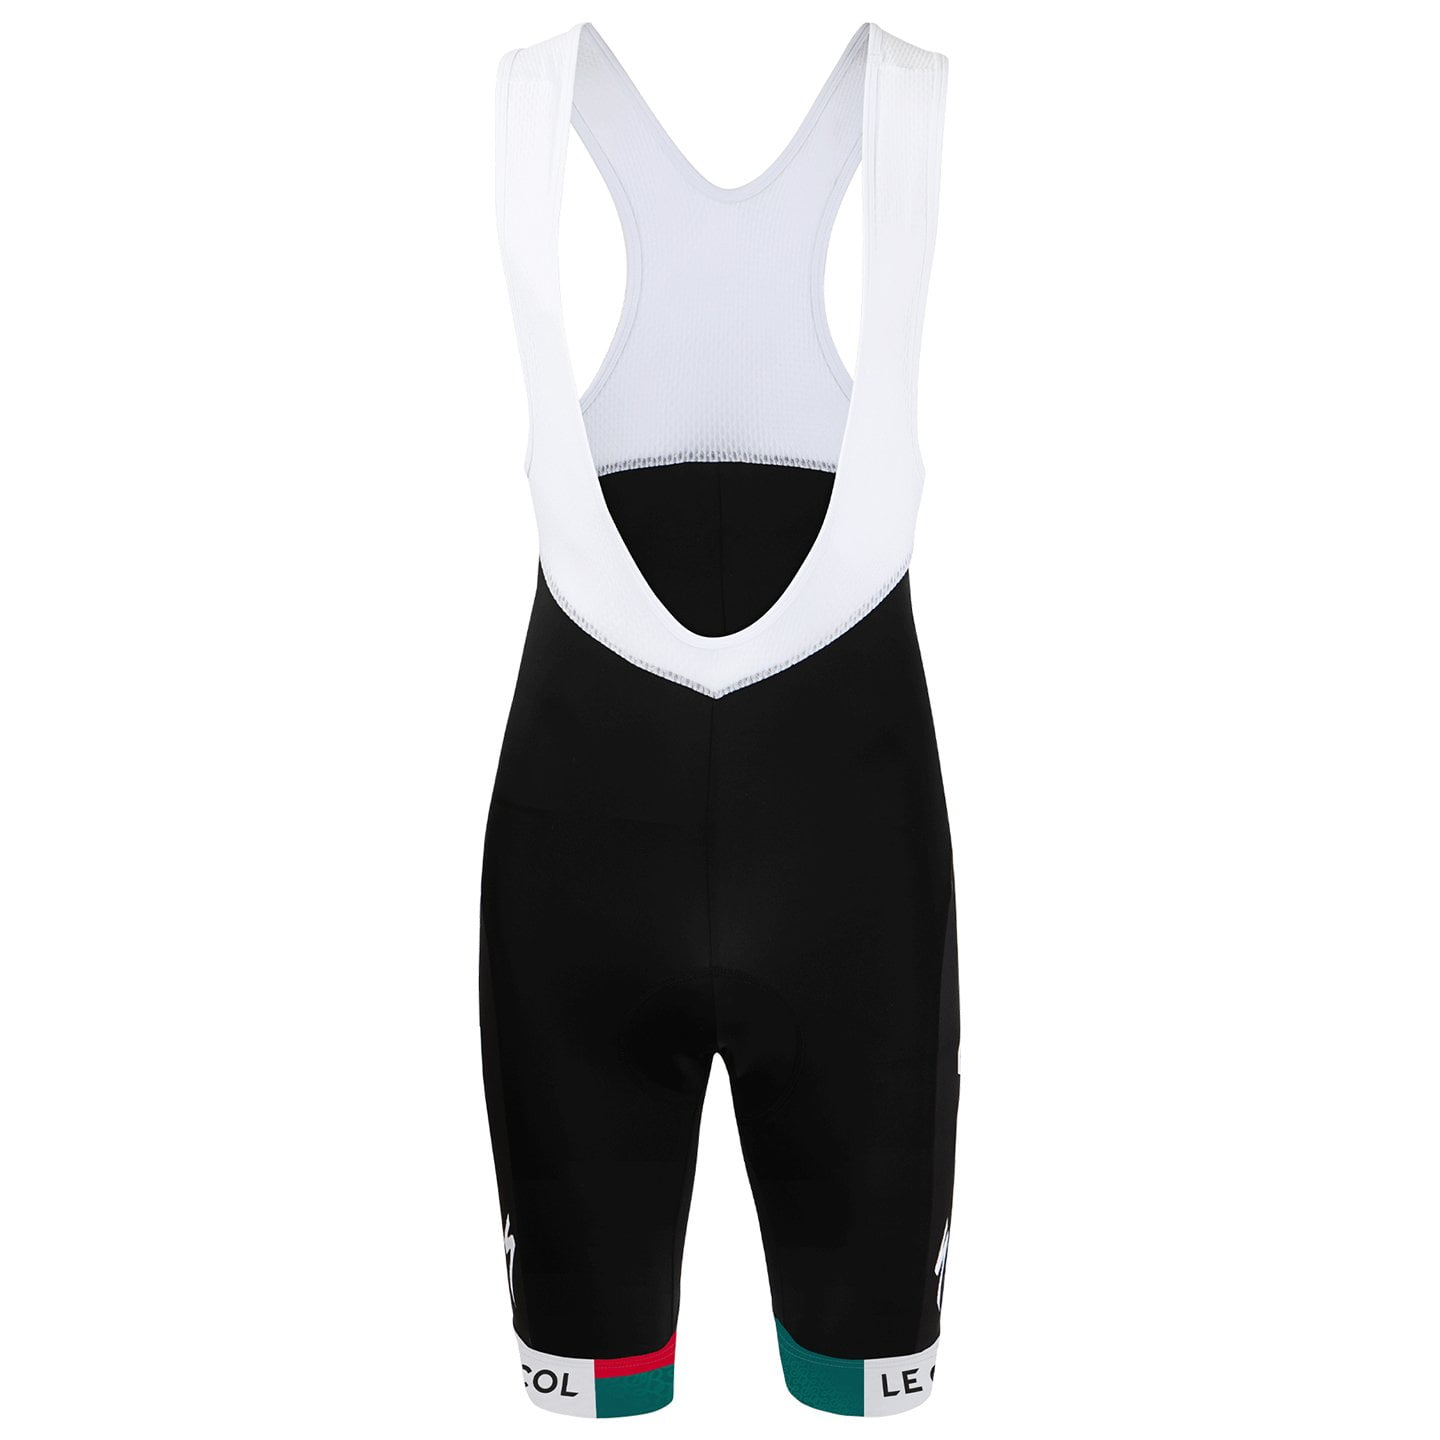 BORA-hansgrohe TdF 2022 Bib Shorts, for men, size 2XL, Cycle trousers, Cycle gear